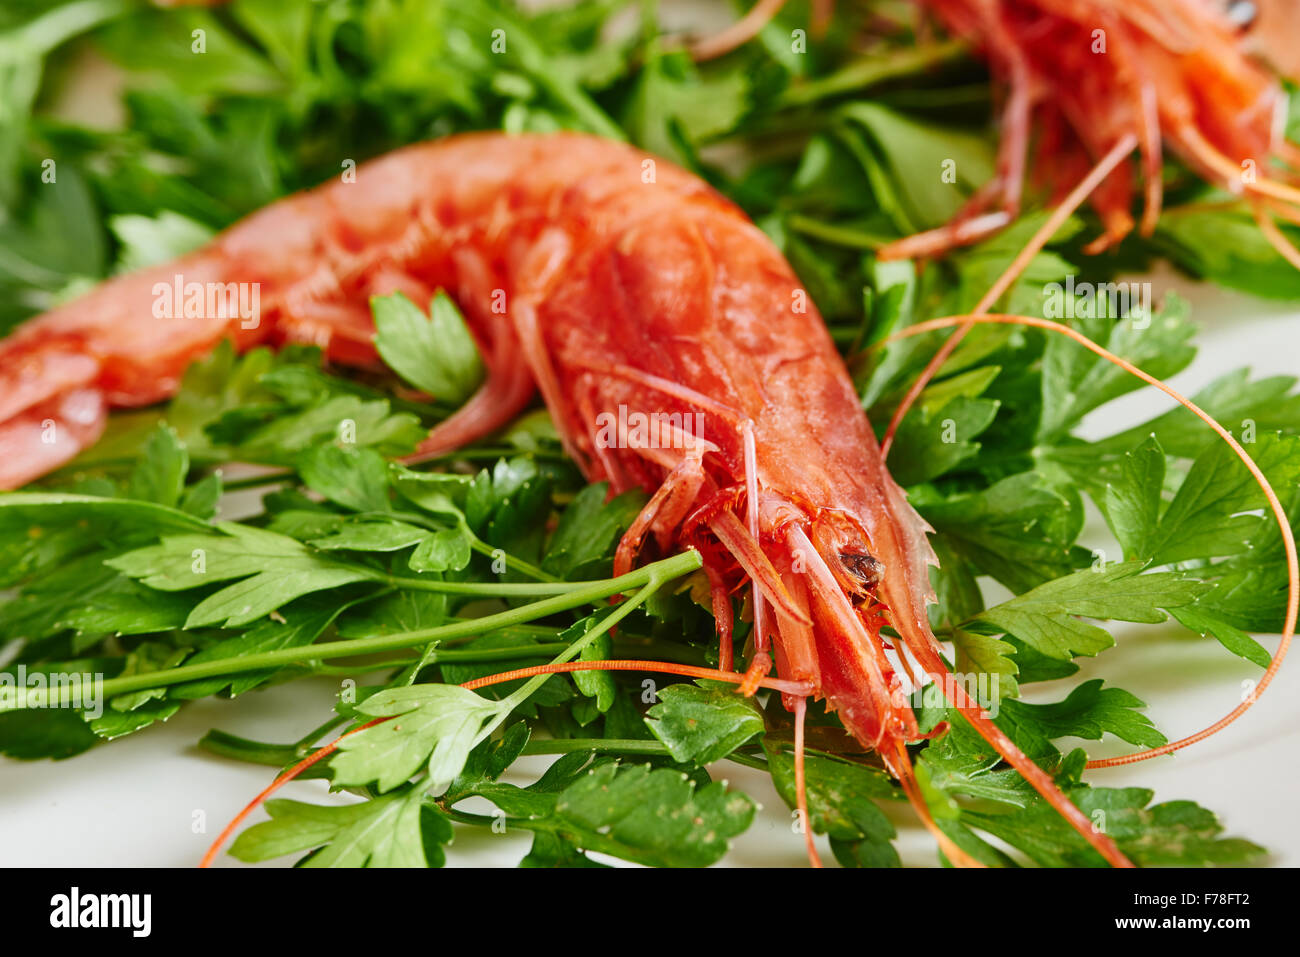 Raw prawn and parsley on white plate Stock Photo